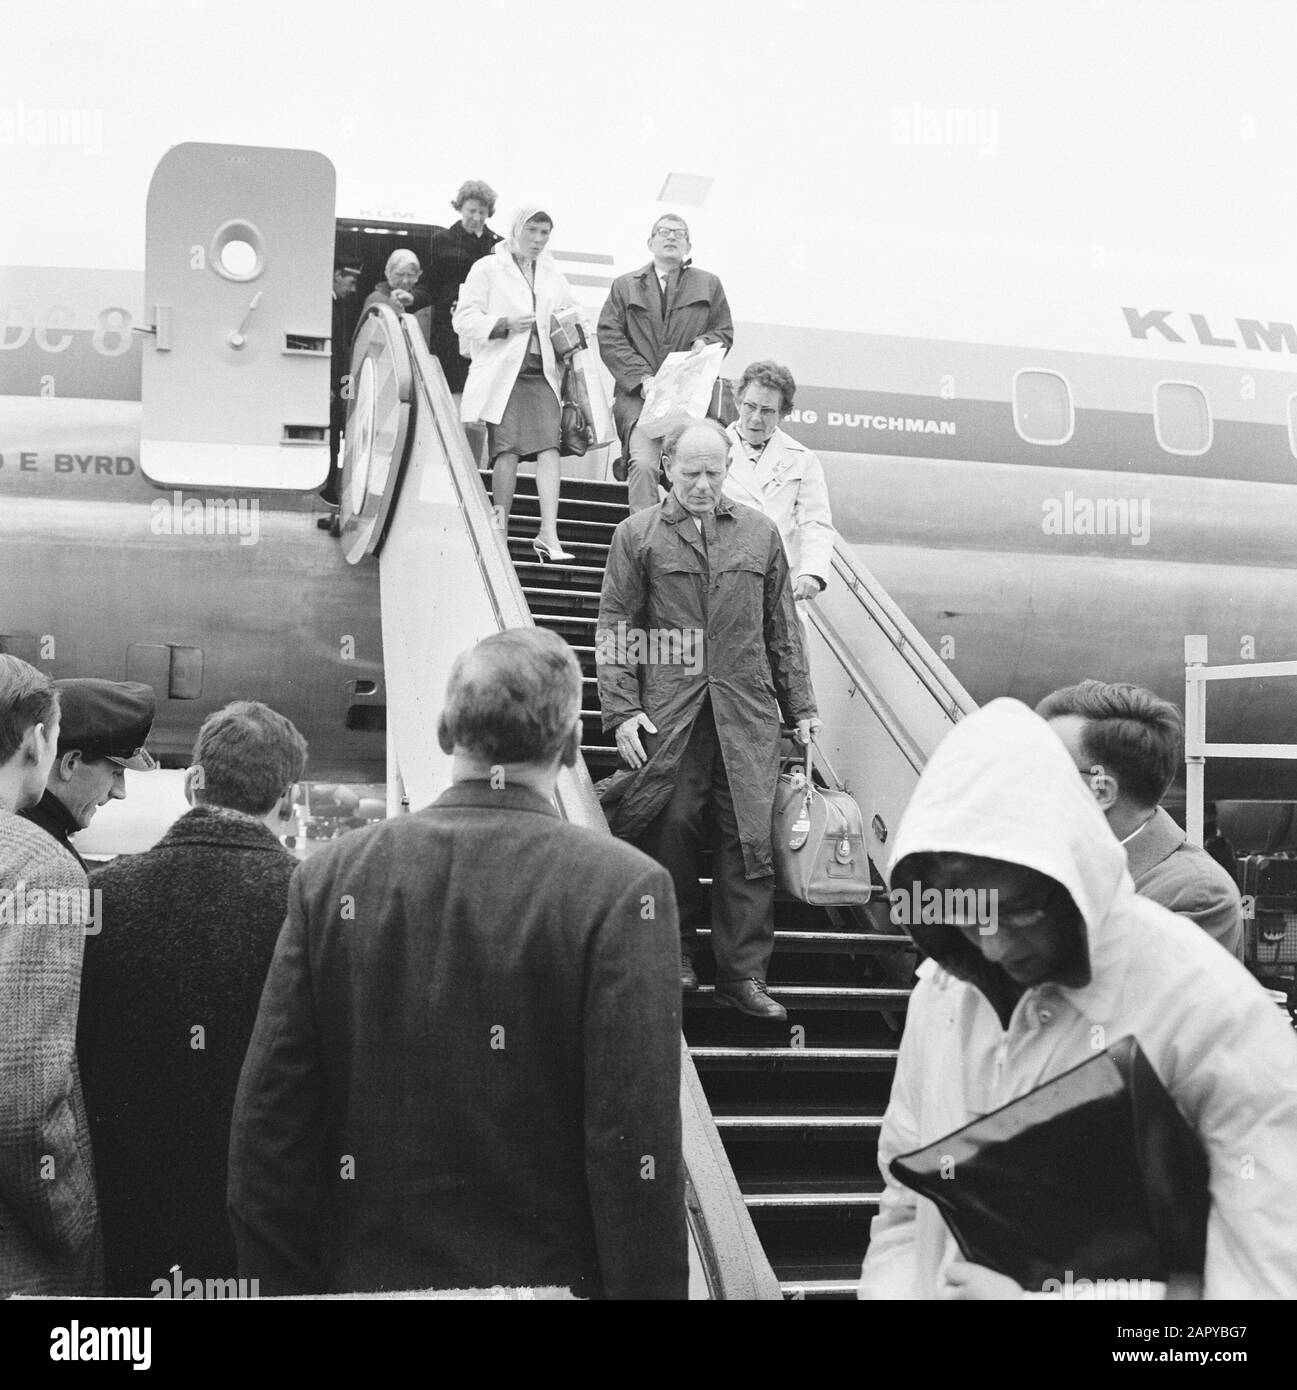 Dutch hikers from four days in Israel back Date: March 24, 1964 Location: Noord-Holland, Schiphol Keywords: hikers Stock Photo